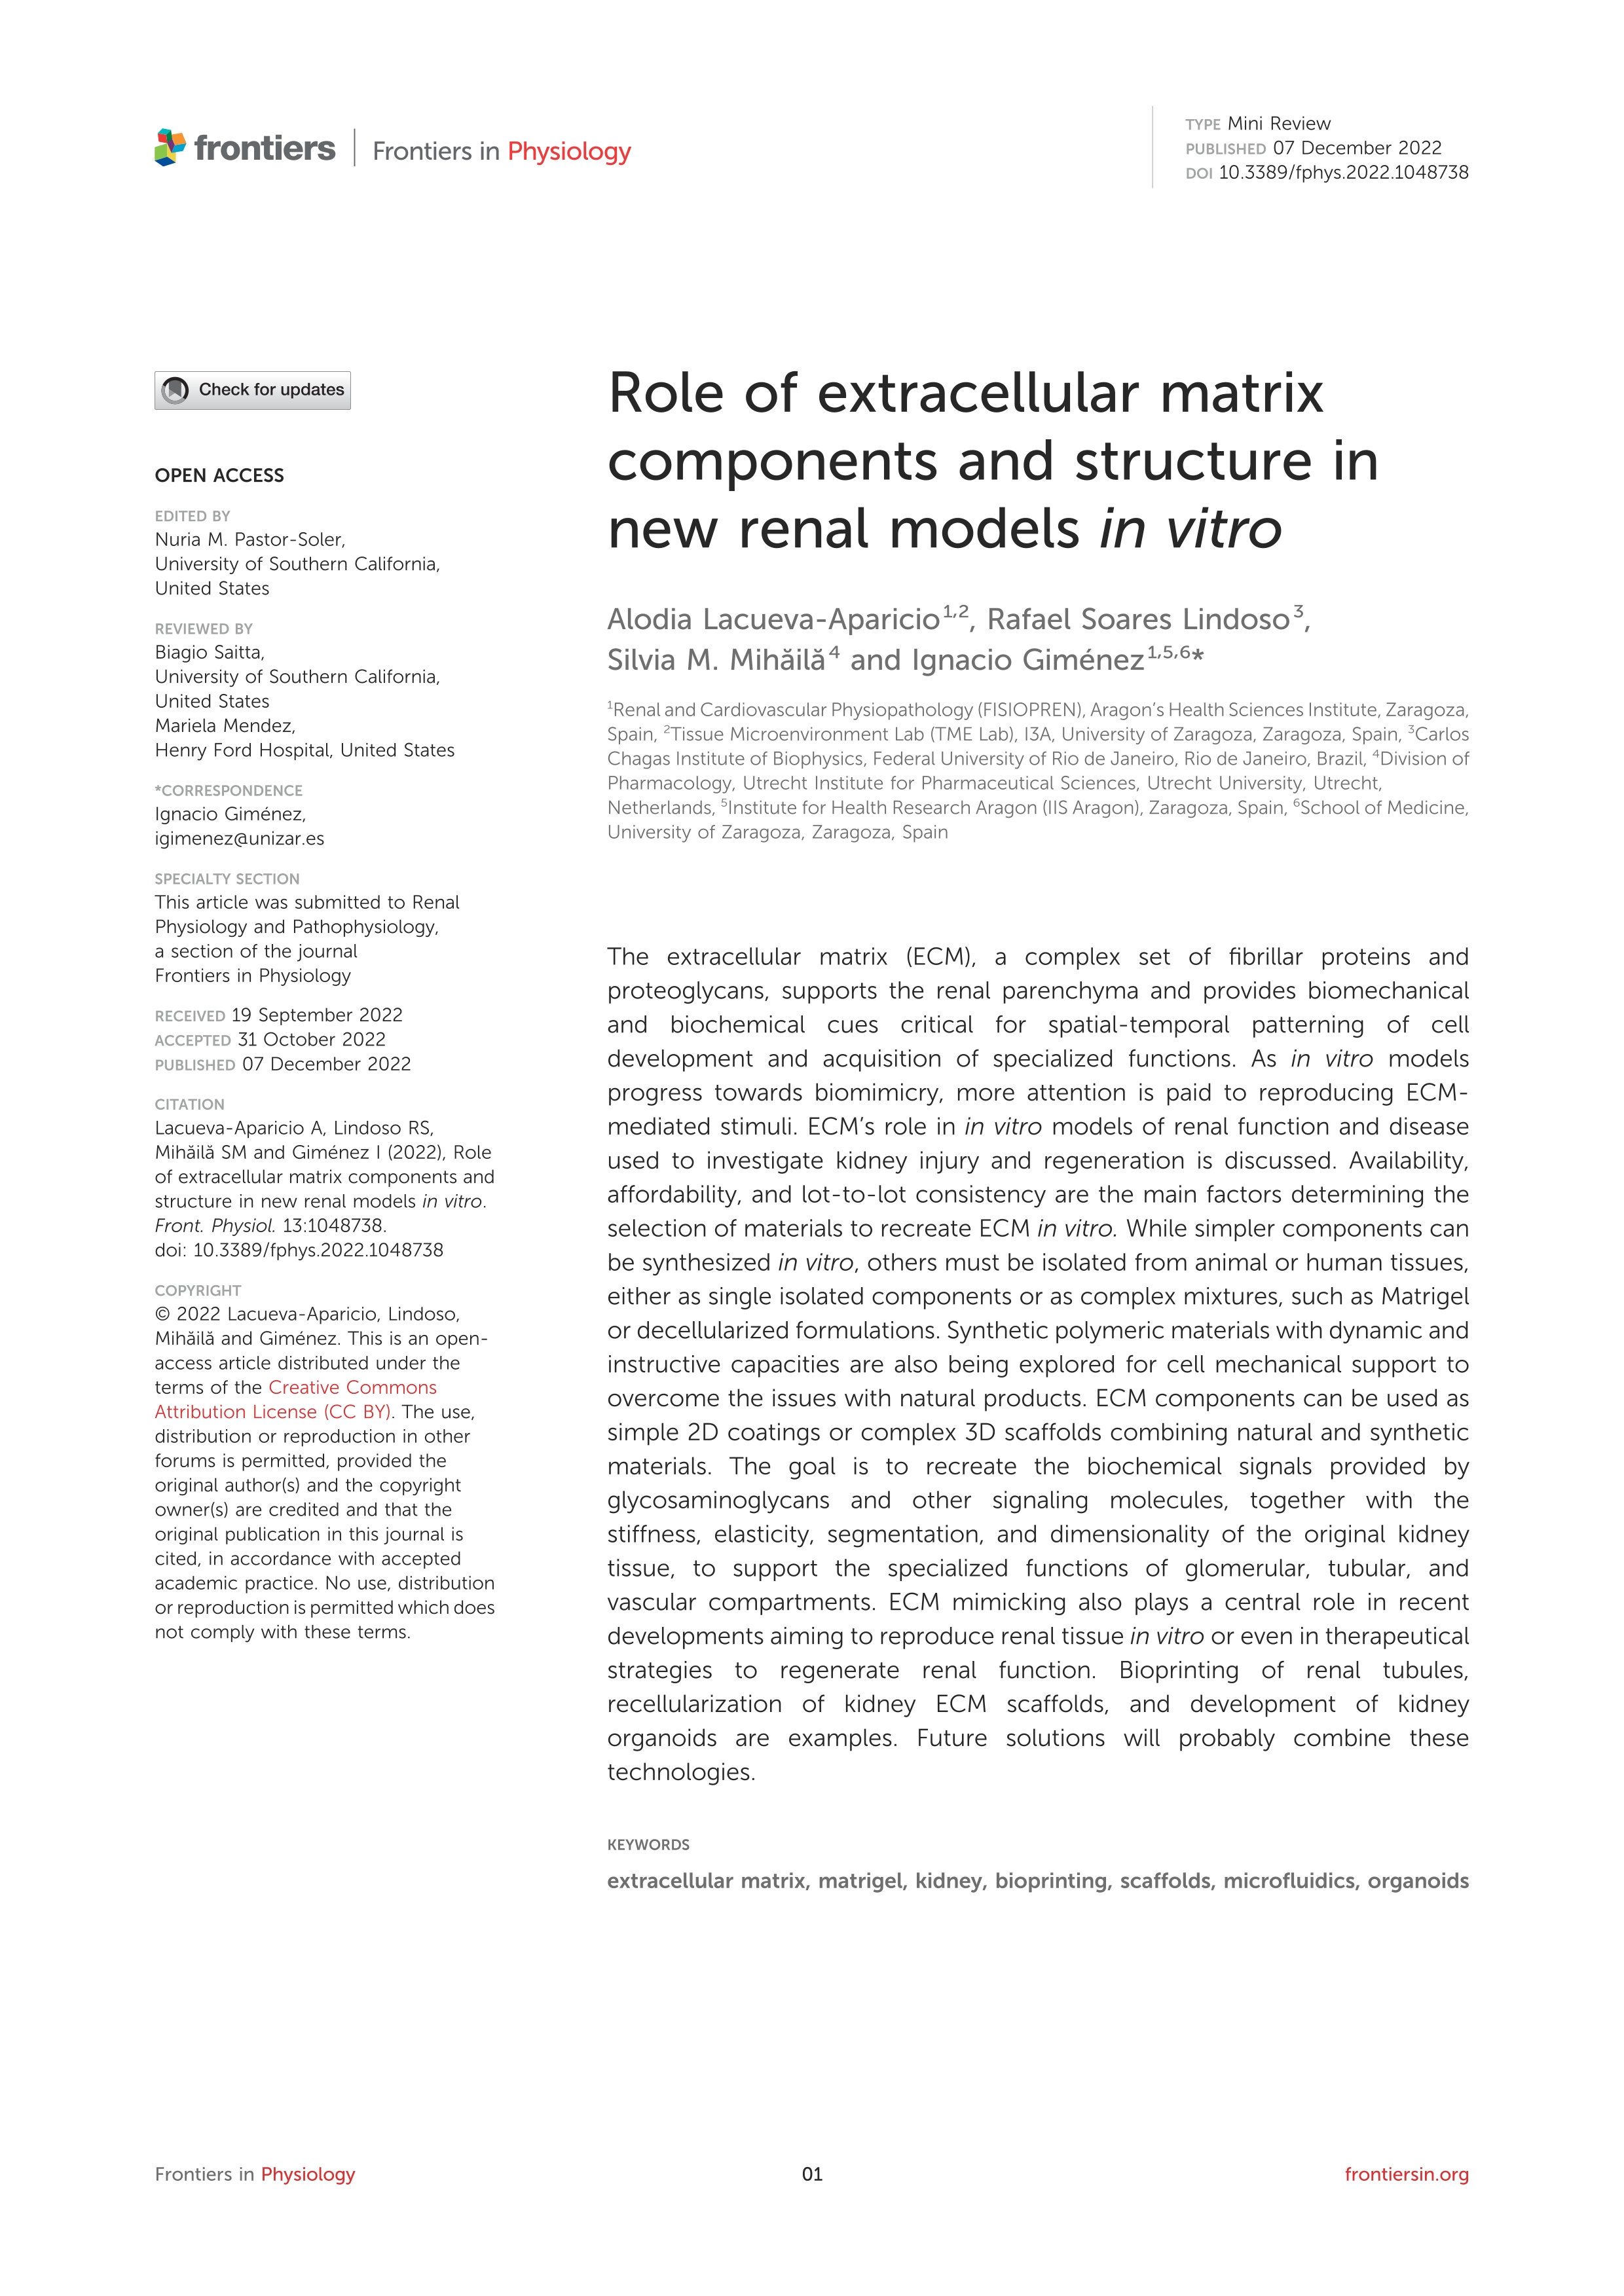 Role of extracellular matrix components and structure in new renal models in vitro